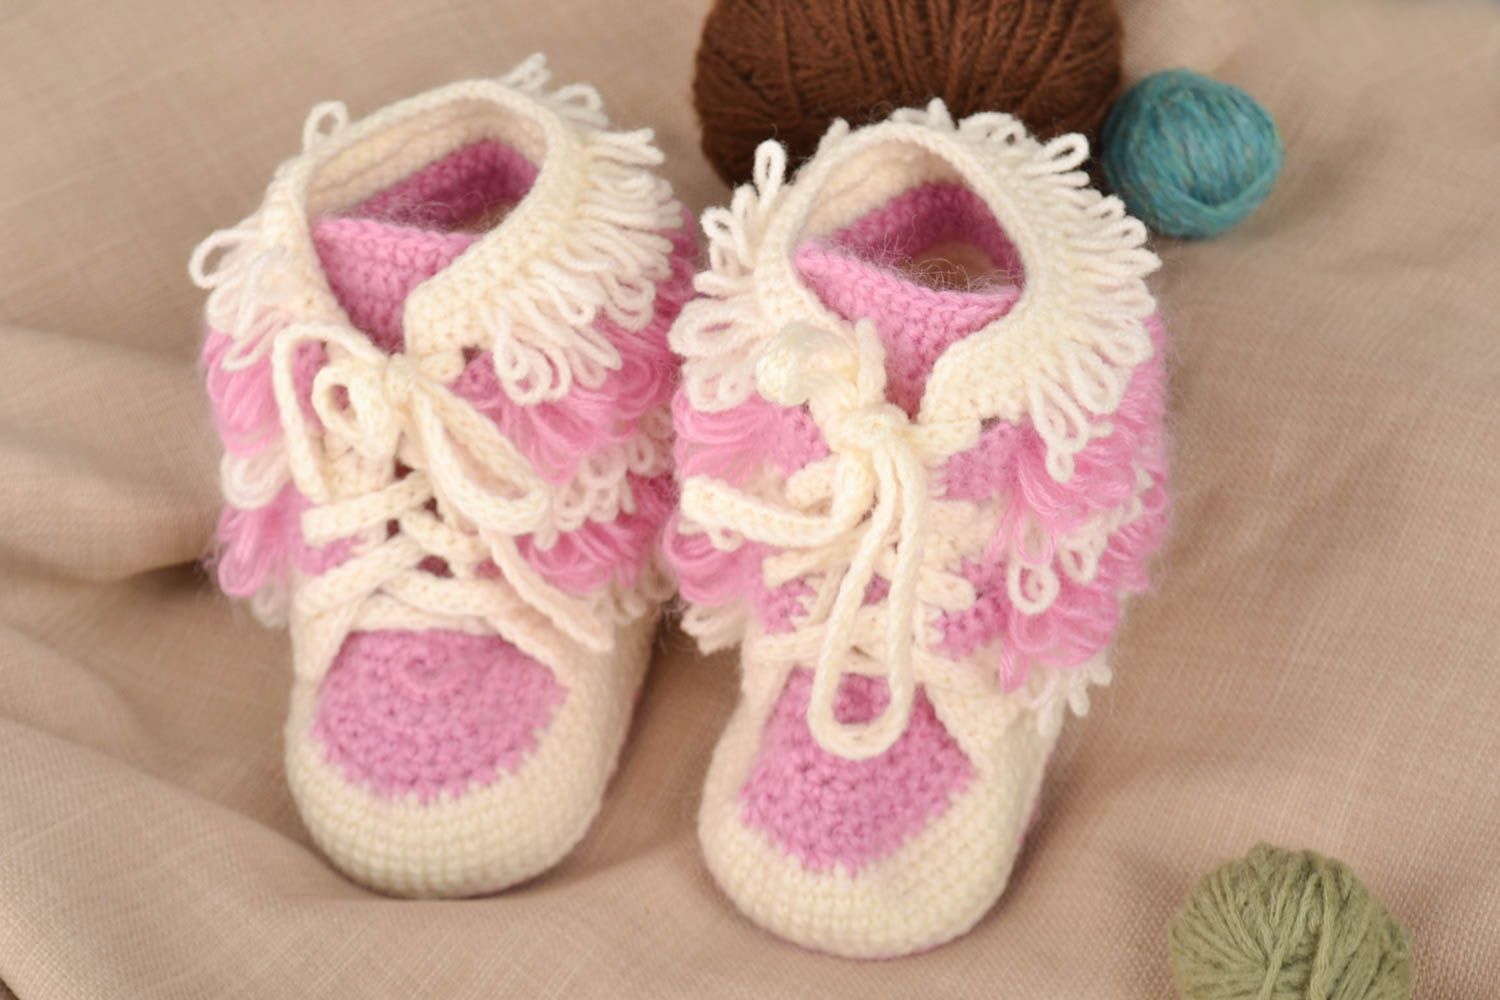 Handmade crochet baby booties baby bootees design fashion accessories for kids photo 1